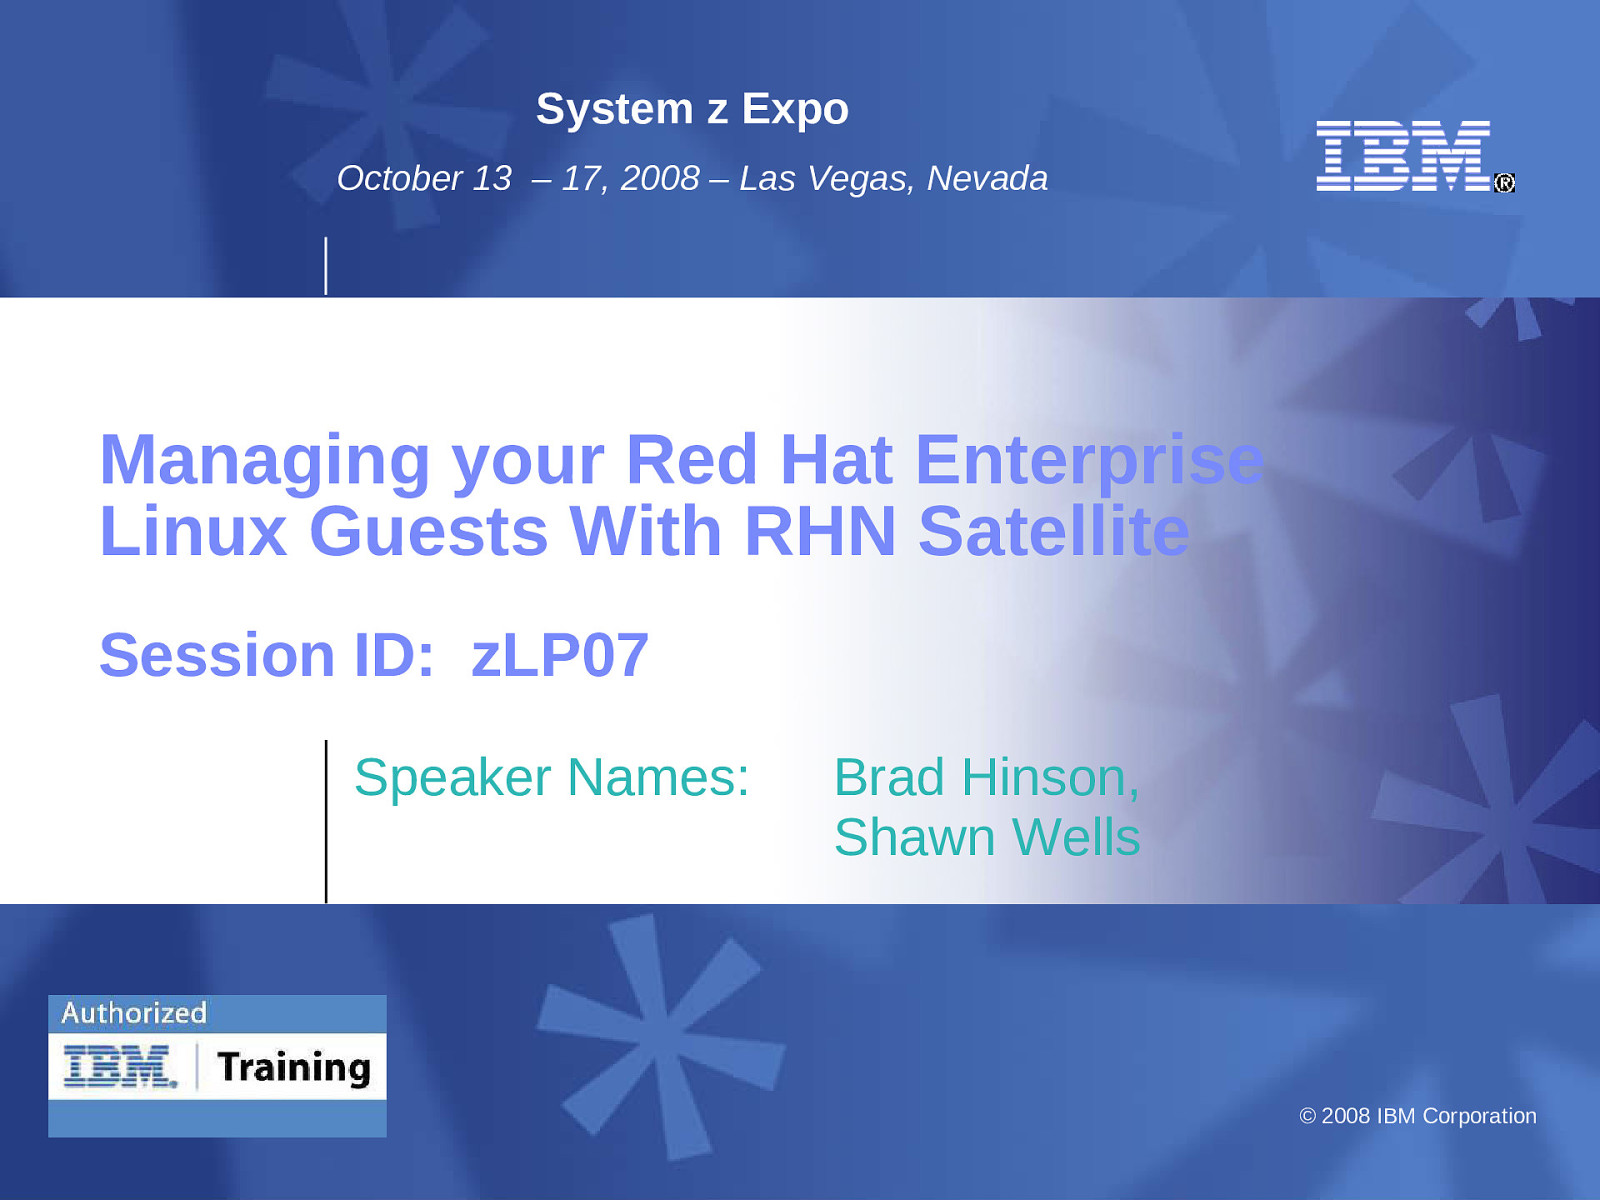 Session ID zLP07: Managing your Red Hat Enterprise Linux Guests with RHN Satellite